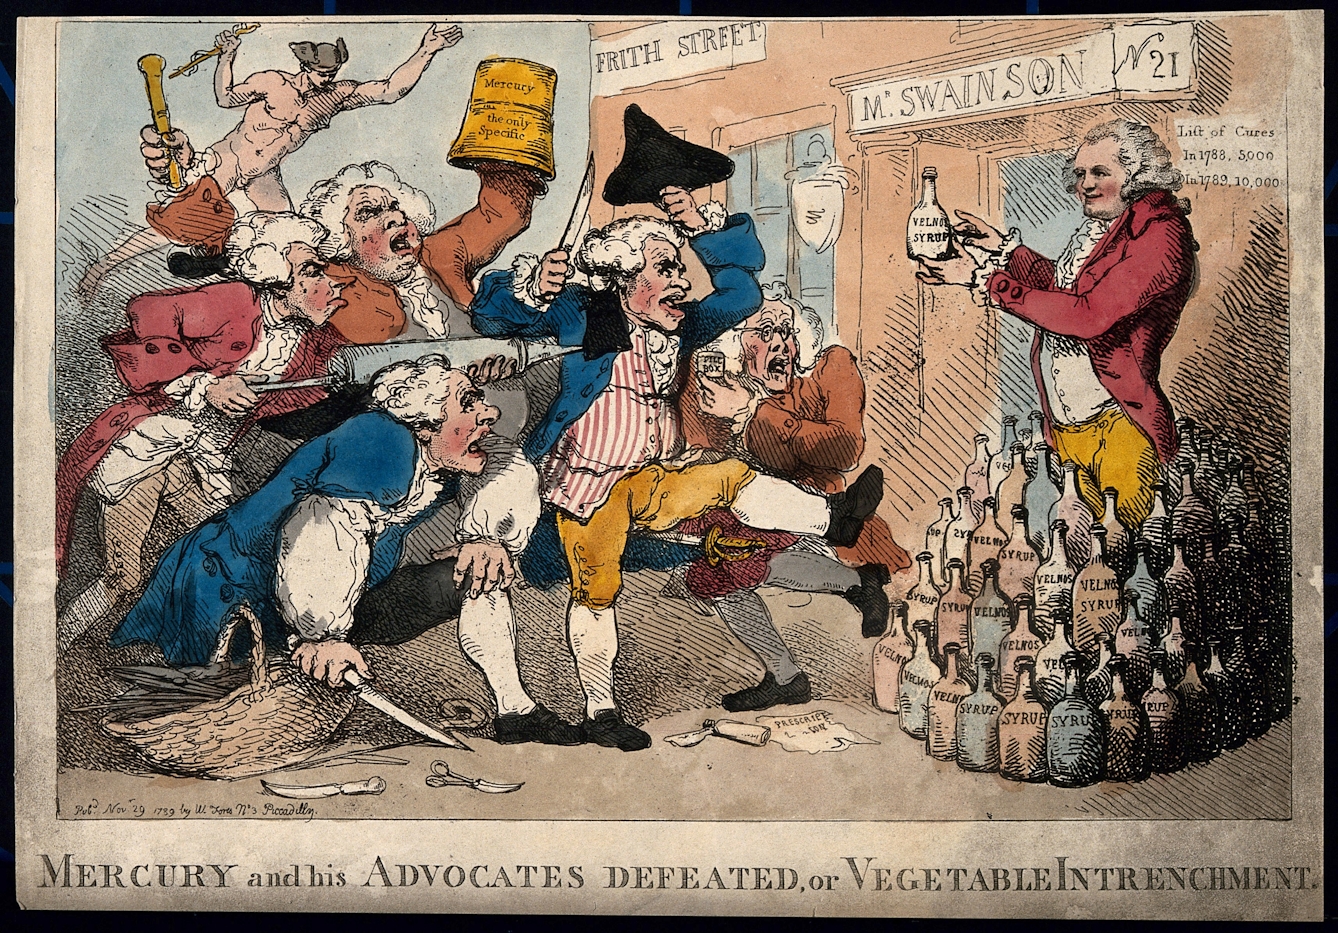 Isaac Swainson promoting his 'Velno's Vegetable Syrup', facing an onslaught of rival practitioners advocating mercury.